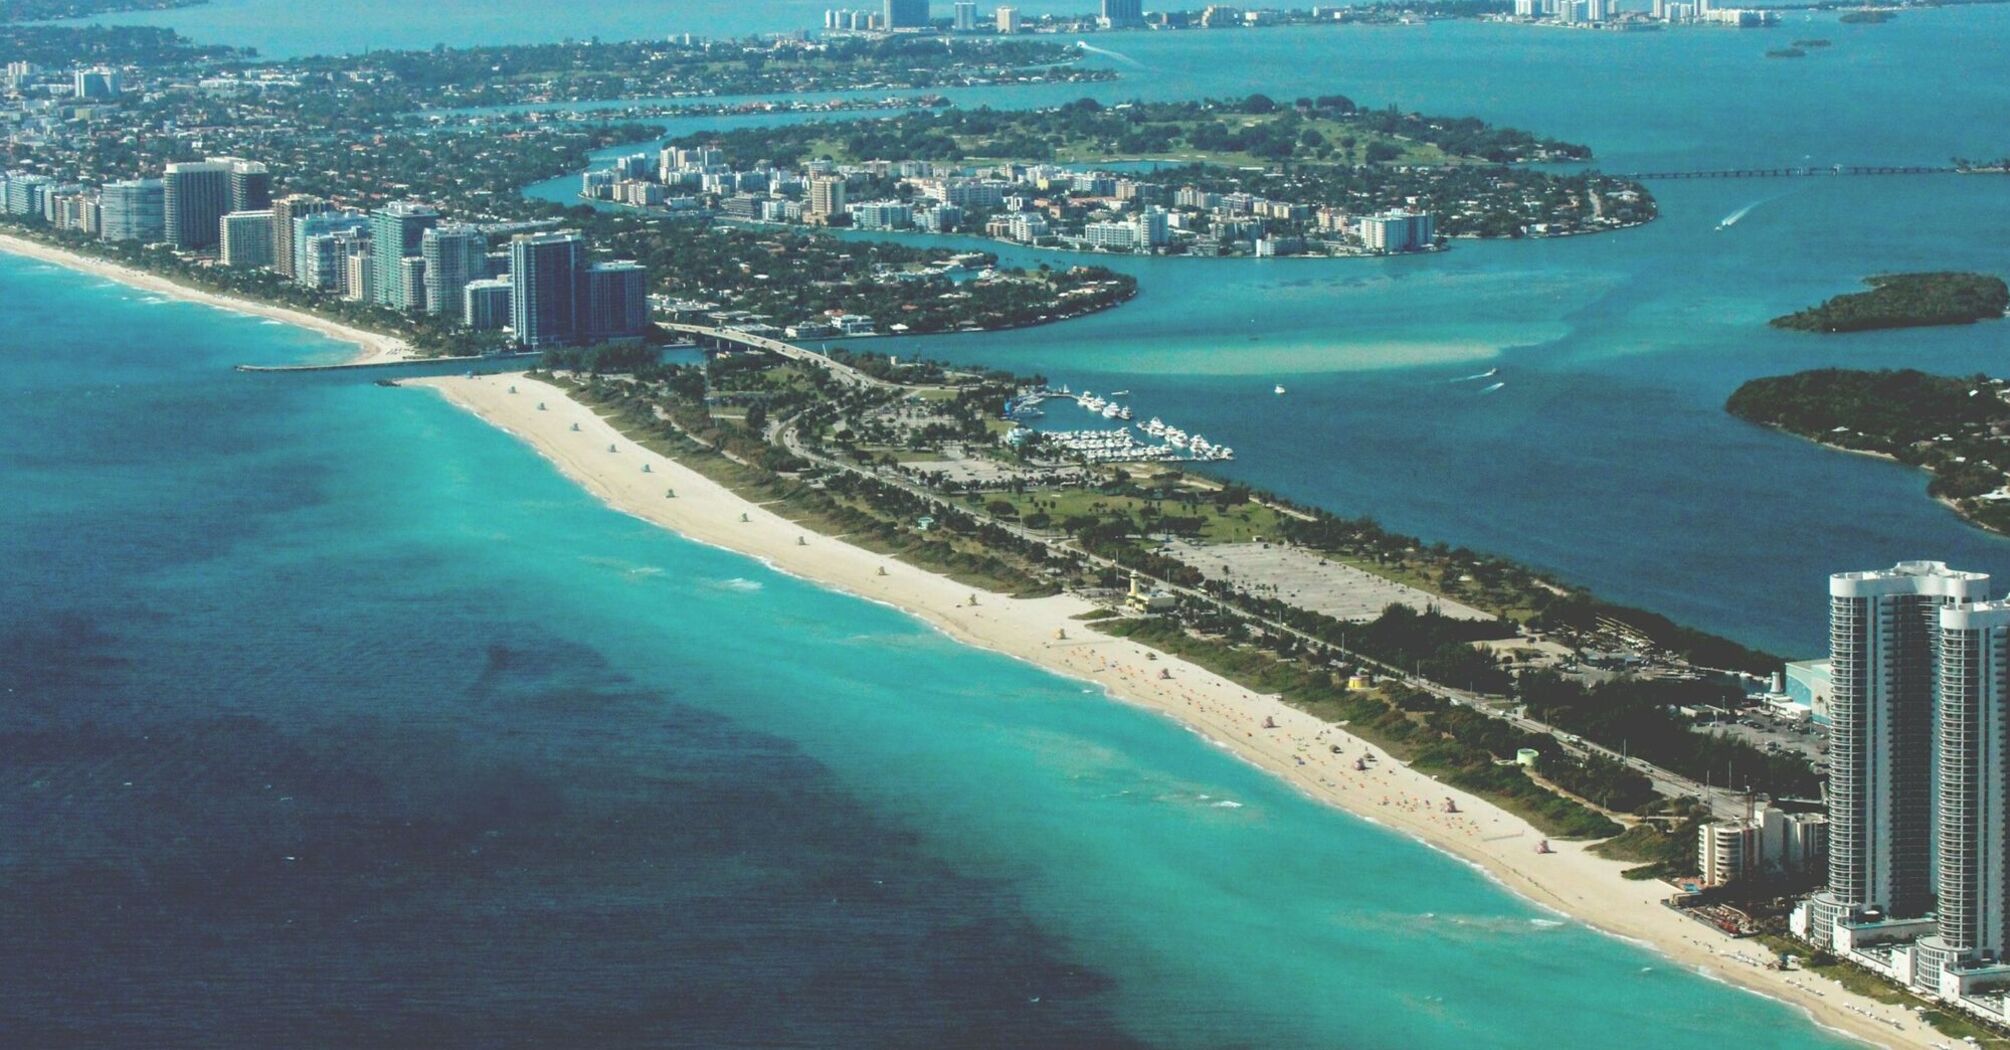 Arial view of Miami coastline with clear blue waters and high-rise buildings